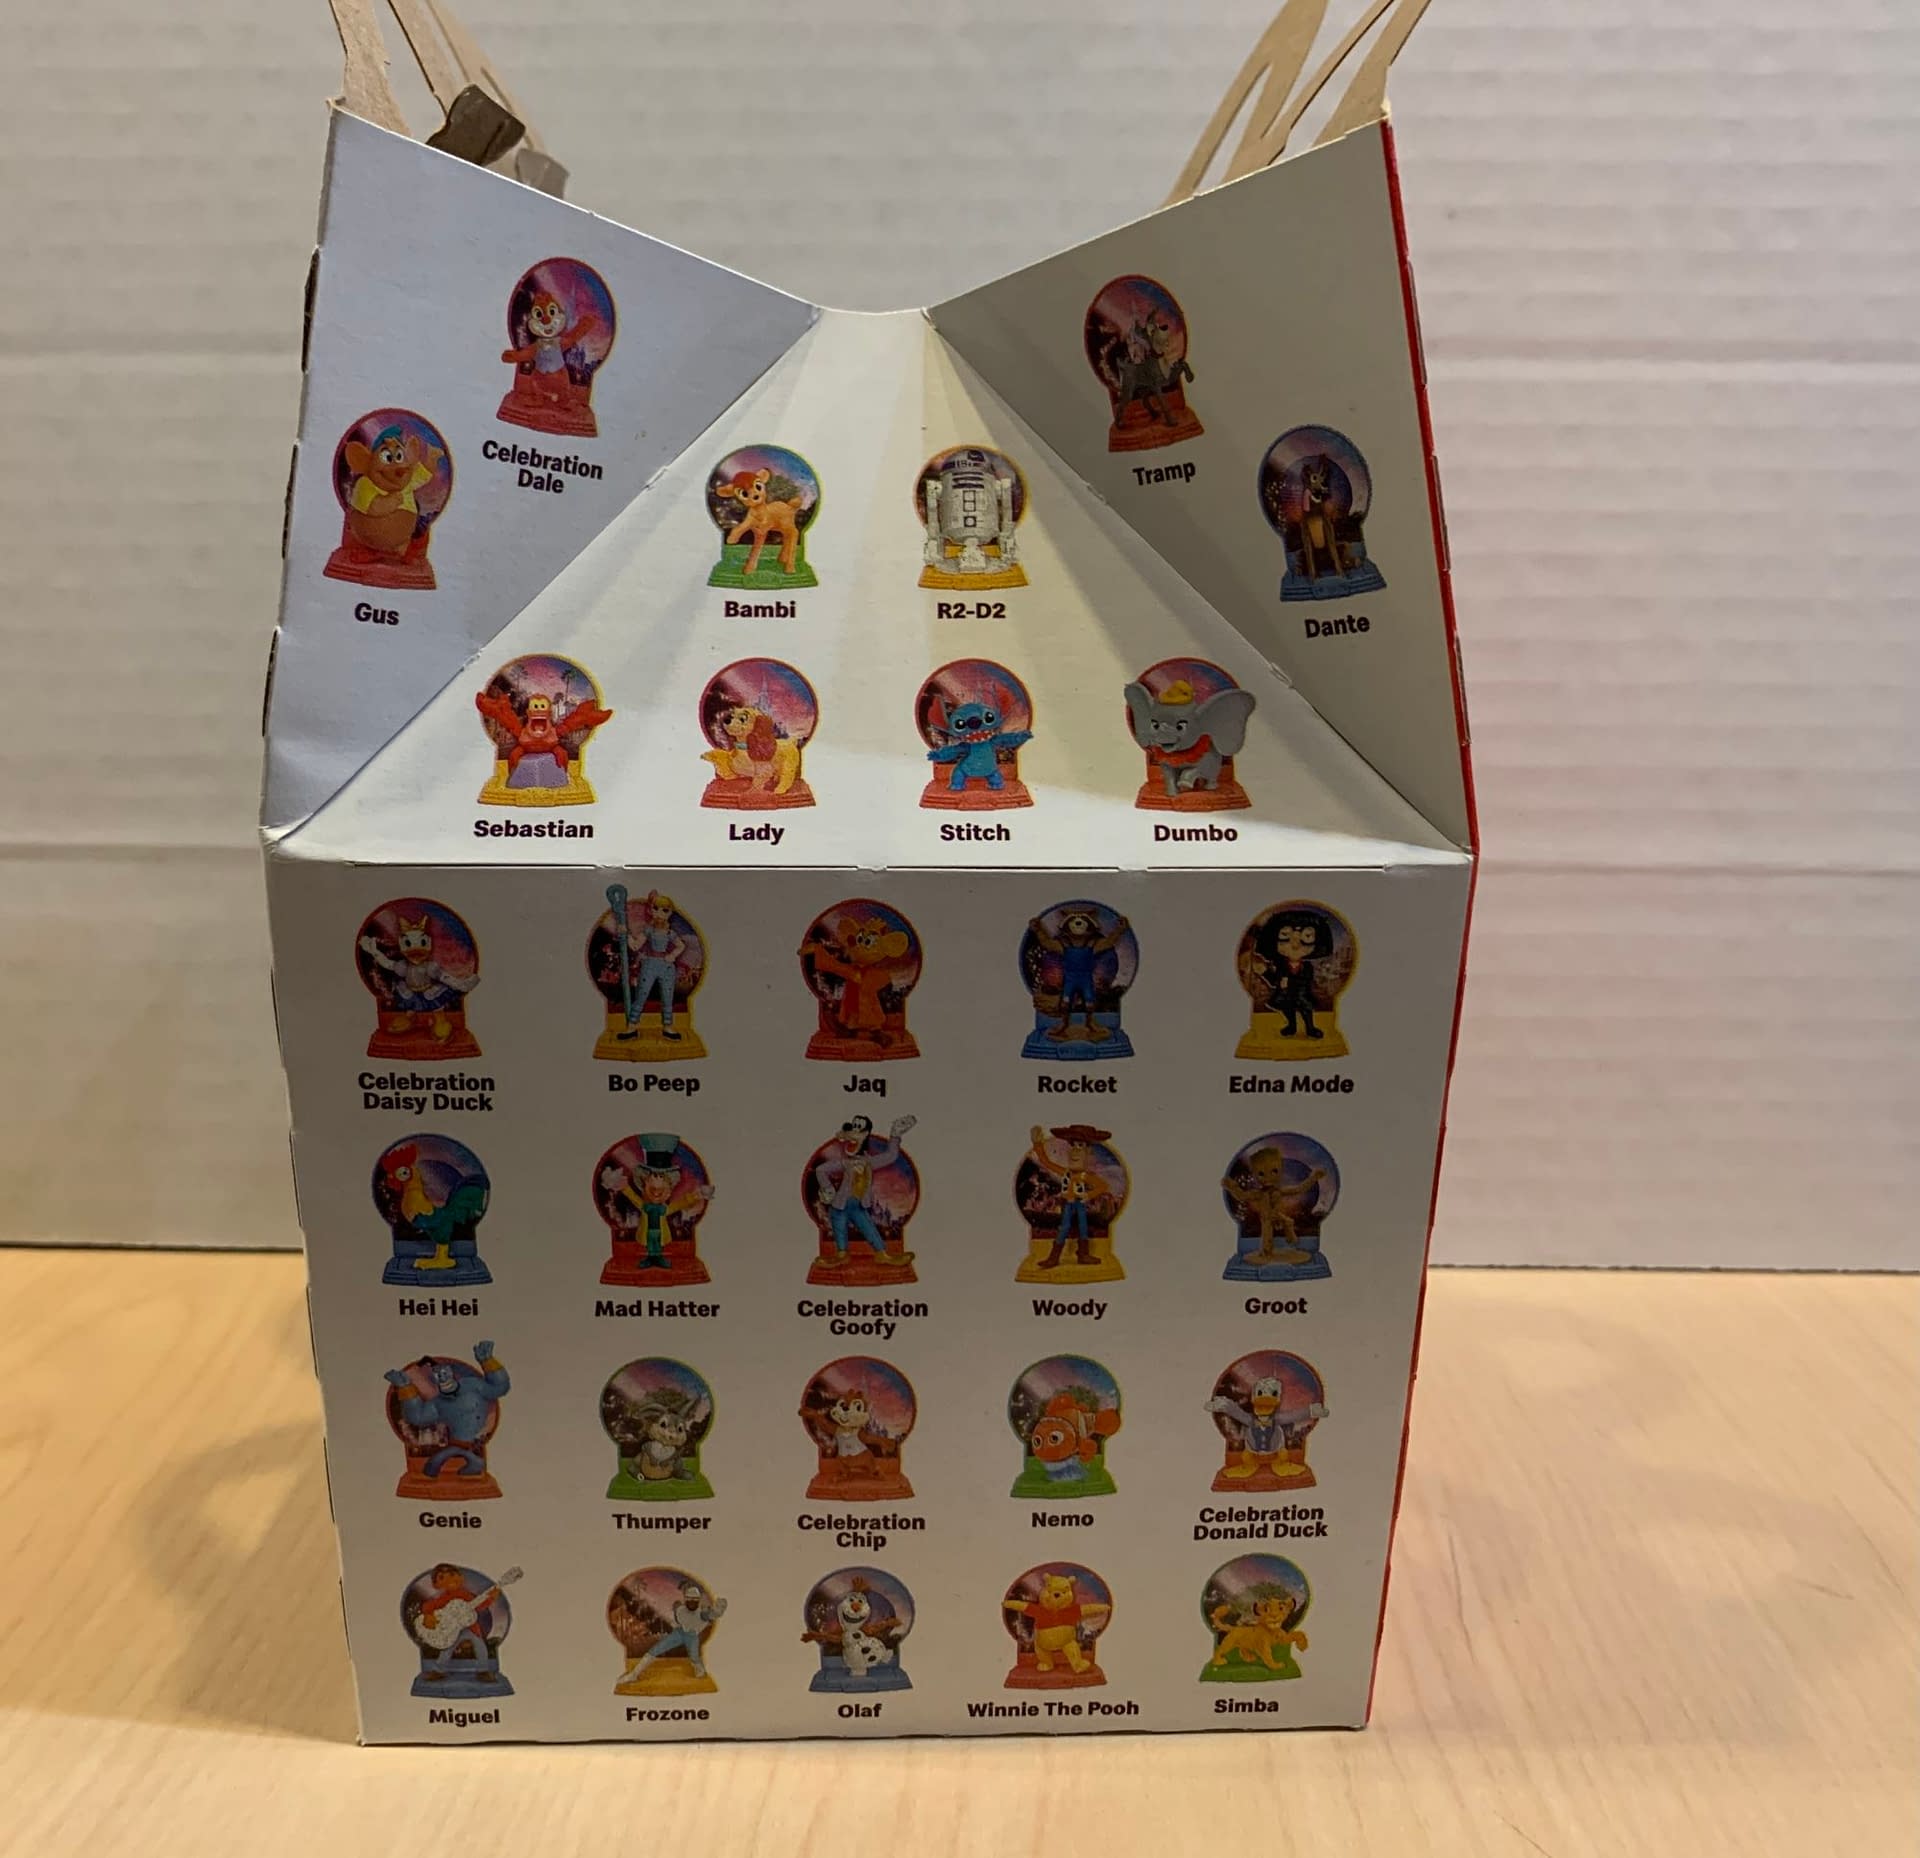 Disney Parks 50th Anniversary McDonald's Happy Meal Toys Are Here